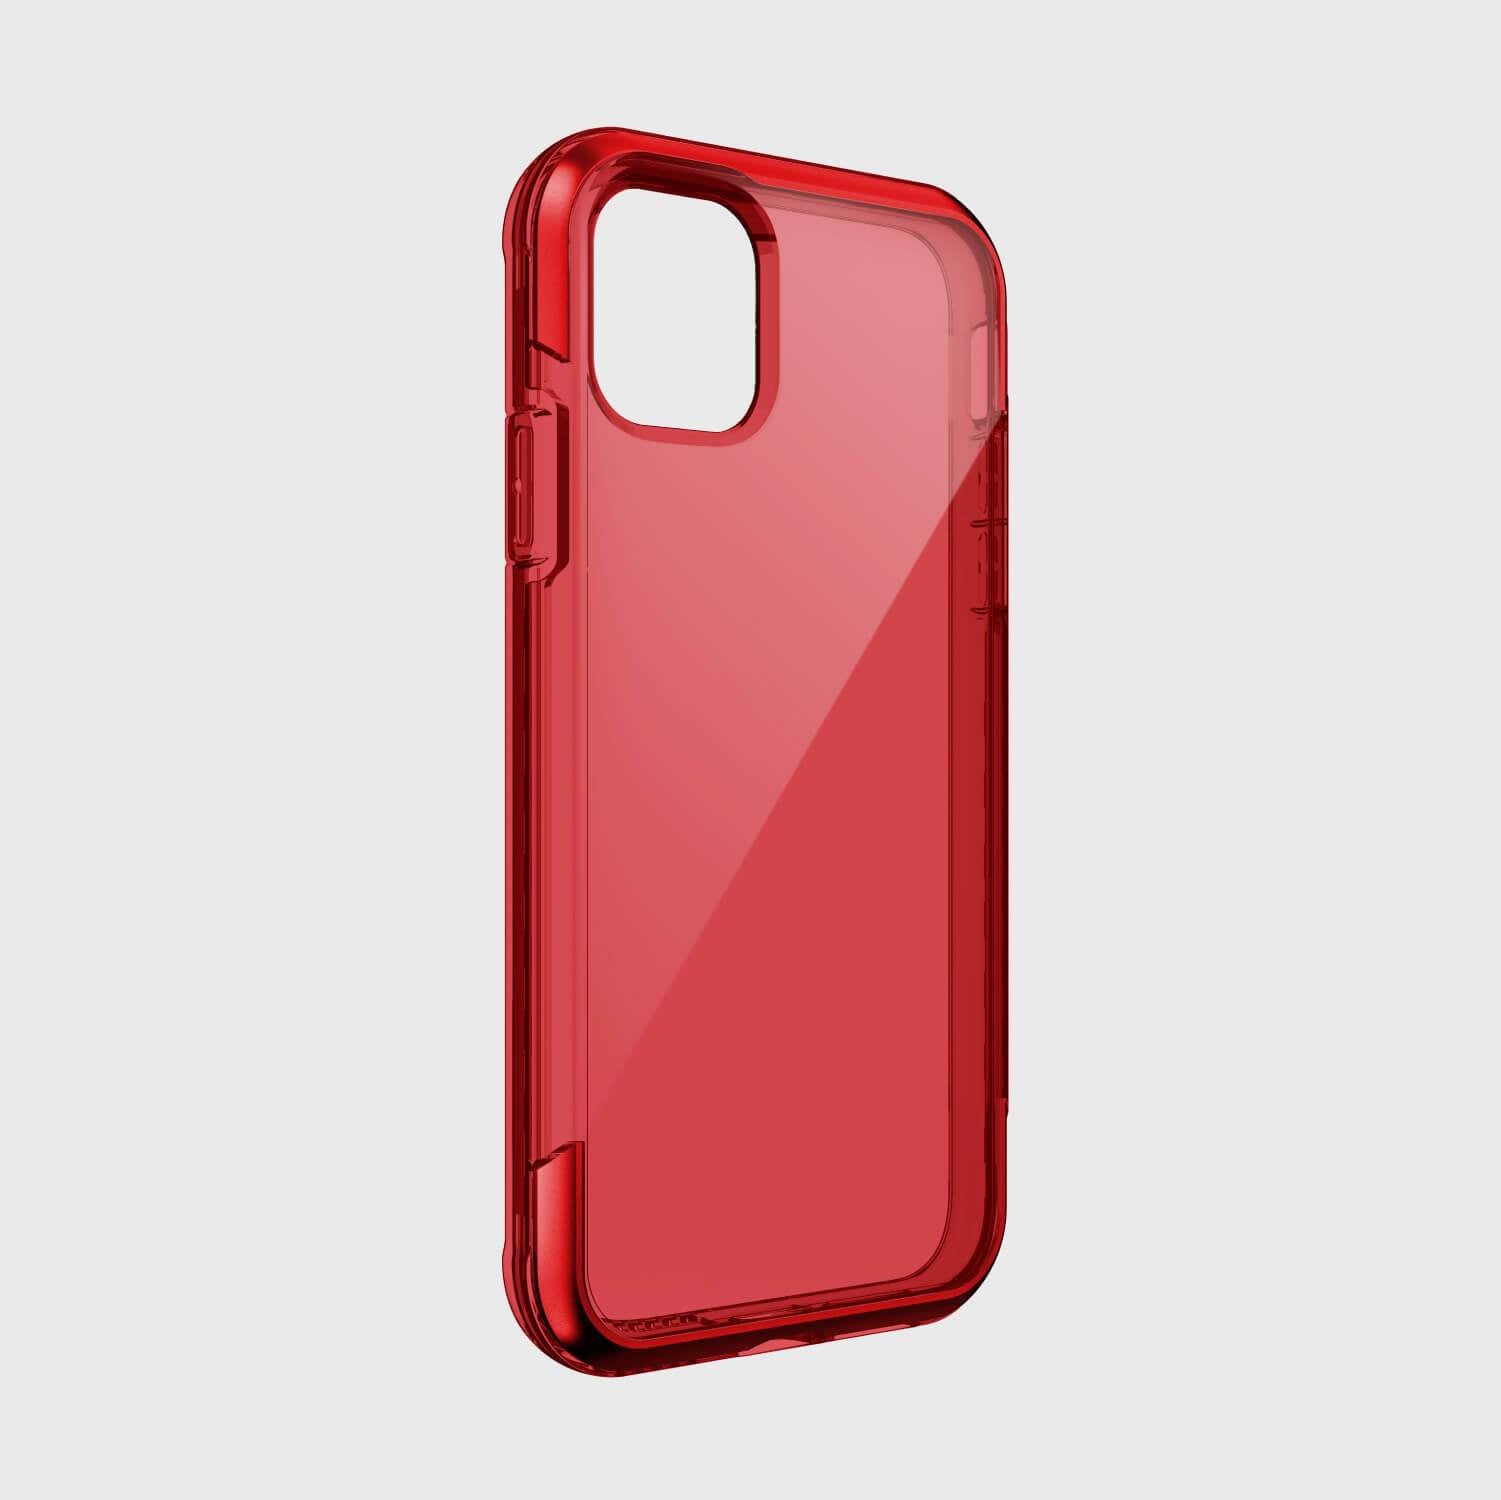 A wireless charging iPhone 11 case in red by Raptic AIR on a white background.